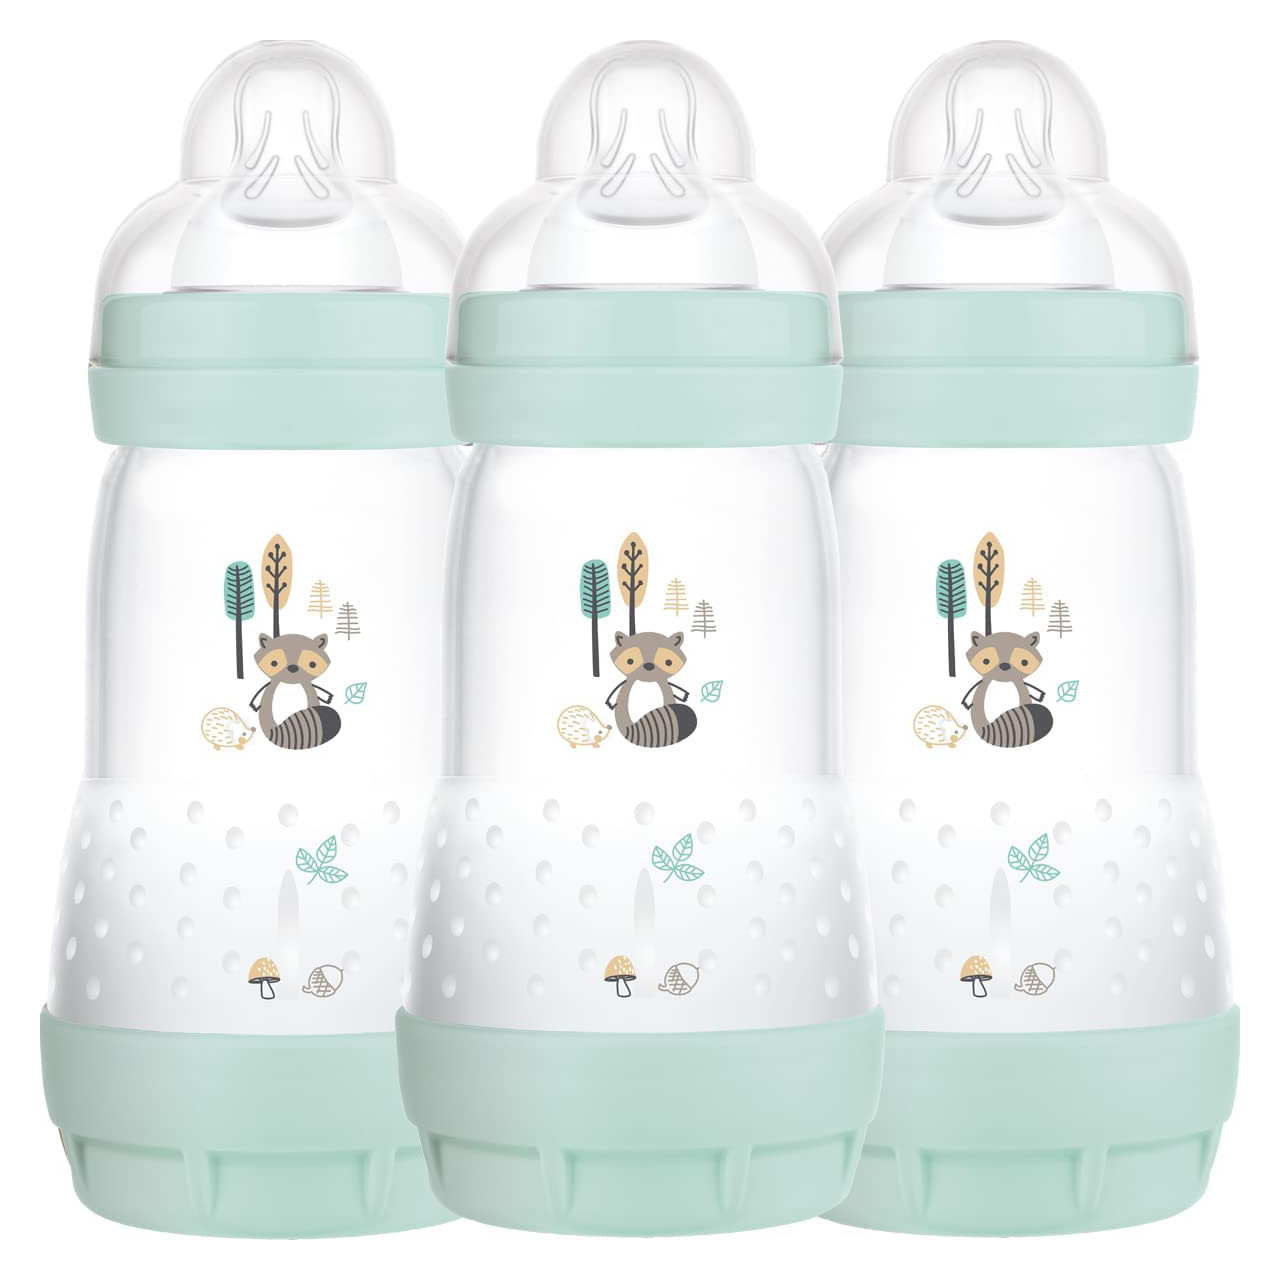 Experts weigh in on the best baby bottles - Daily Mail